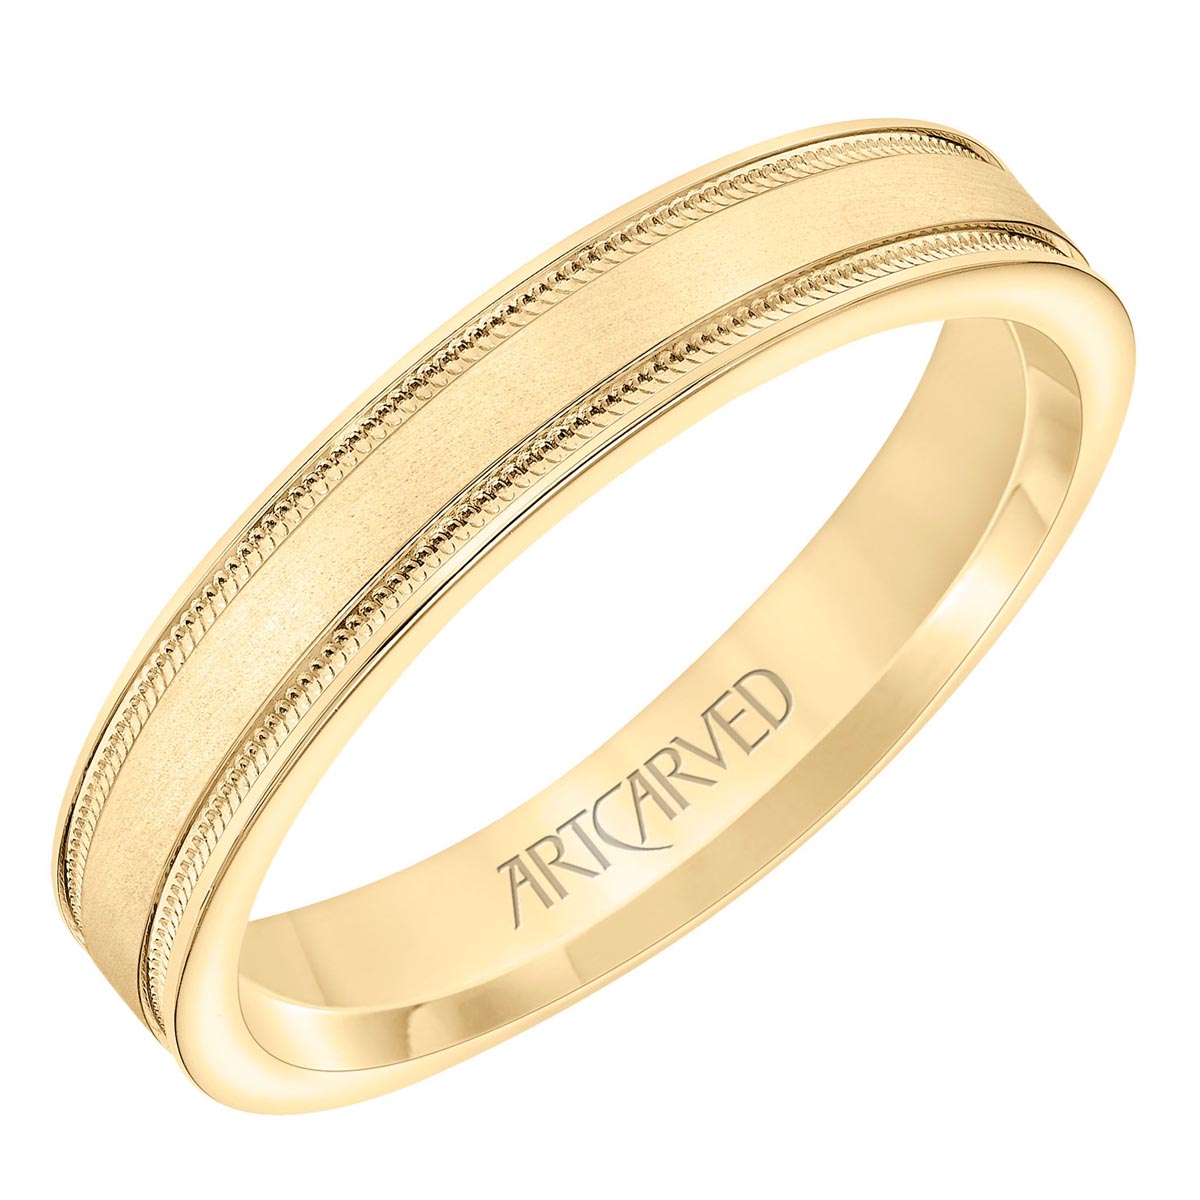 Men's Wedding Band in 14kt Yellow Gold (4mm)